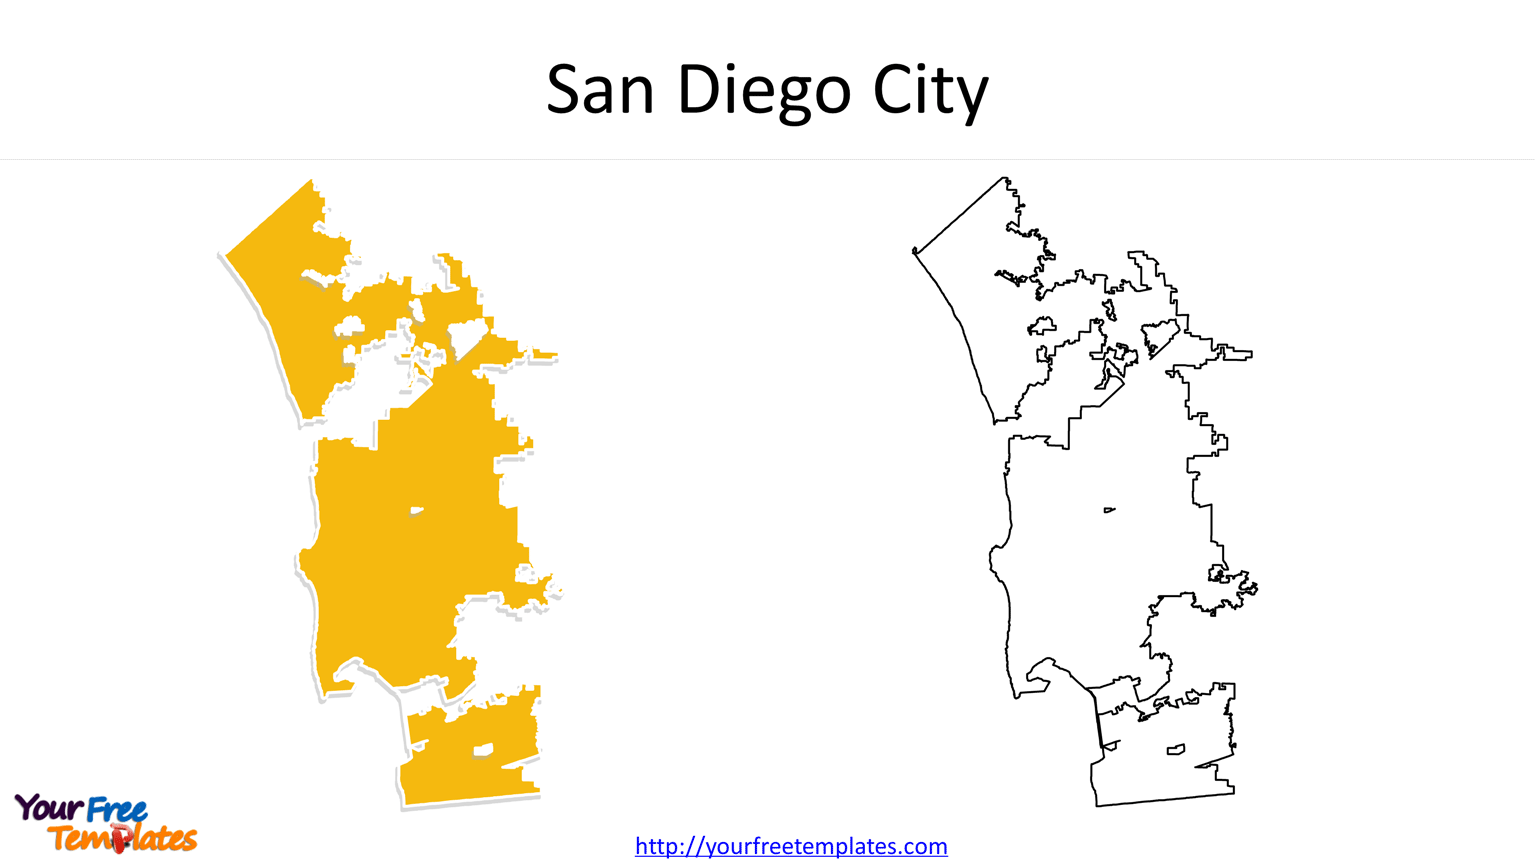 most populated city in the US